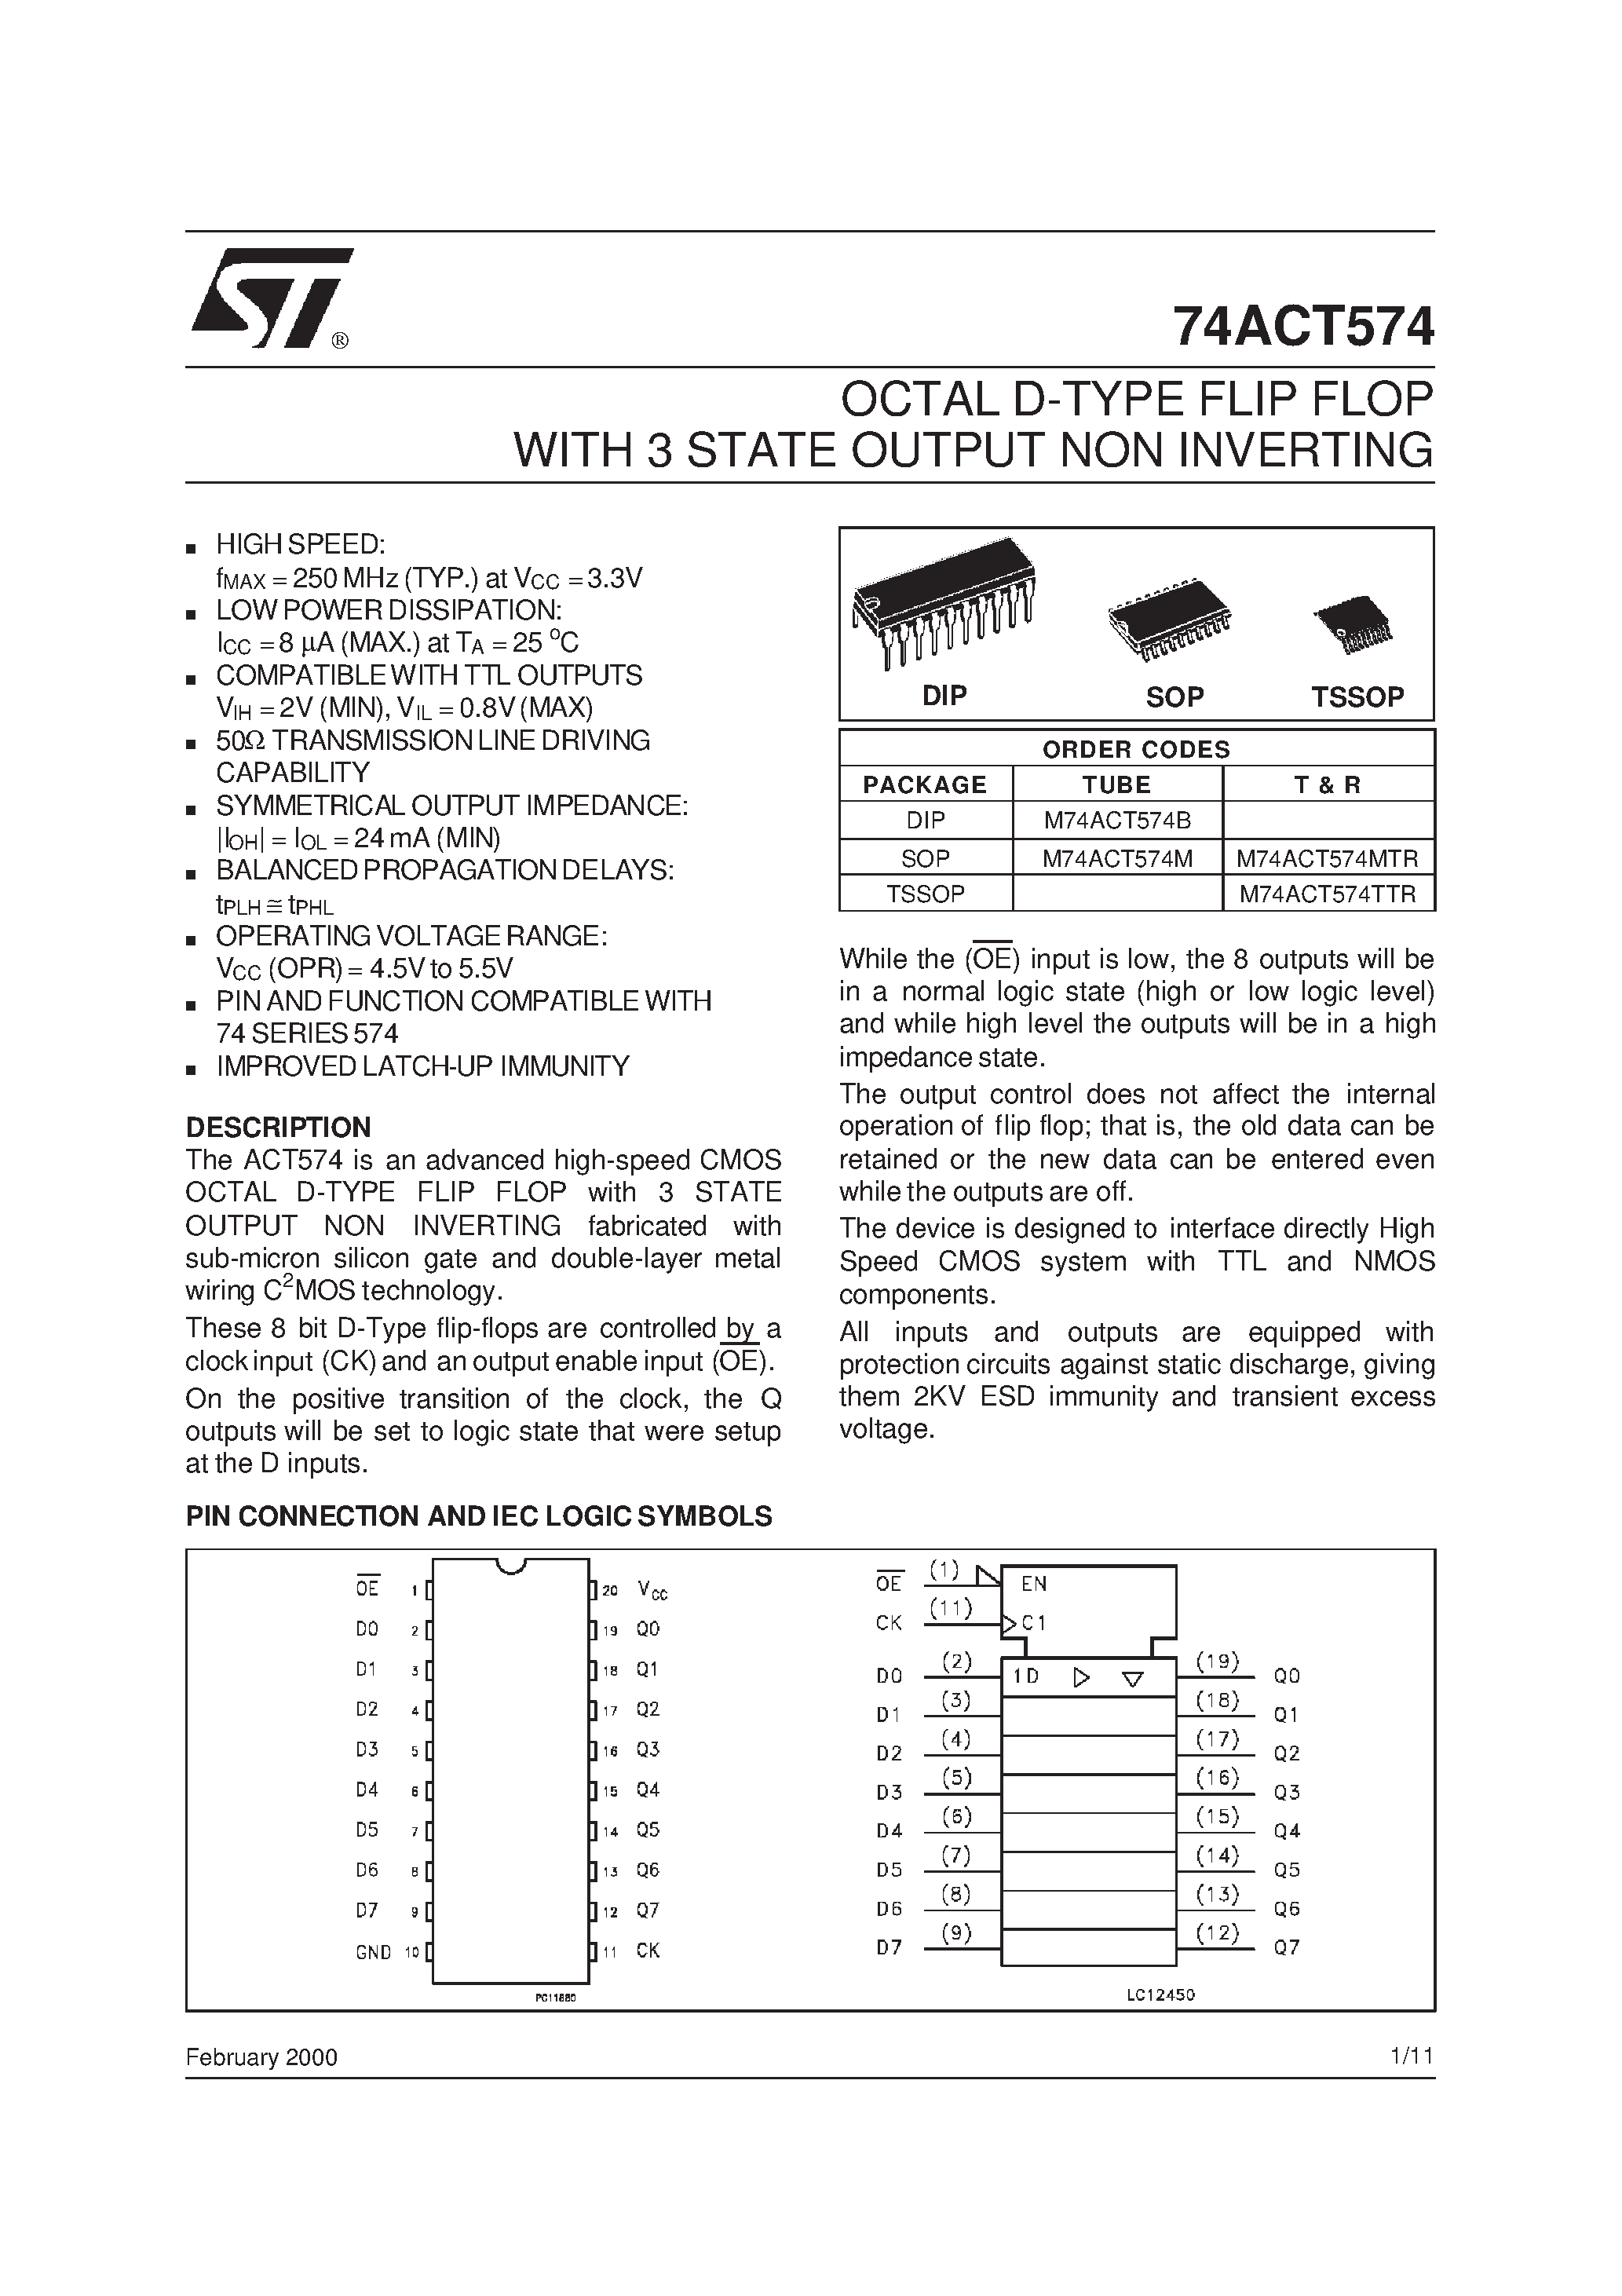 Datasheet M74ACT574MTR - OCTAL D-TYPE FLIP FLOP WITH 3 STATE OUTPUT NON INVERTING page 1